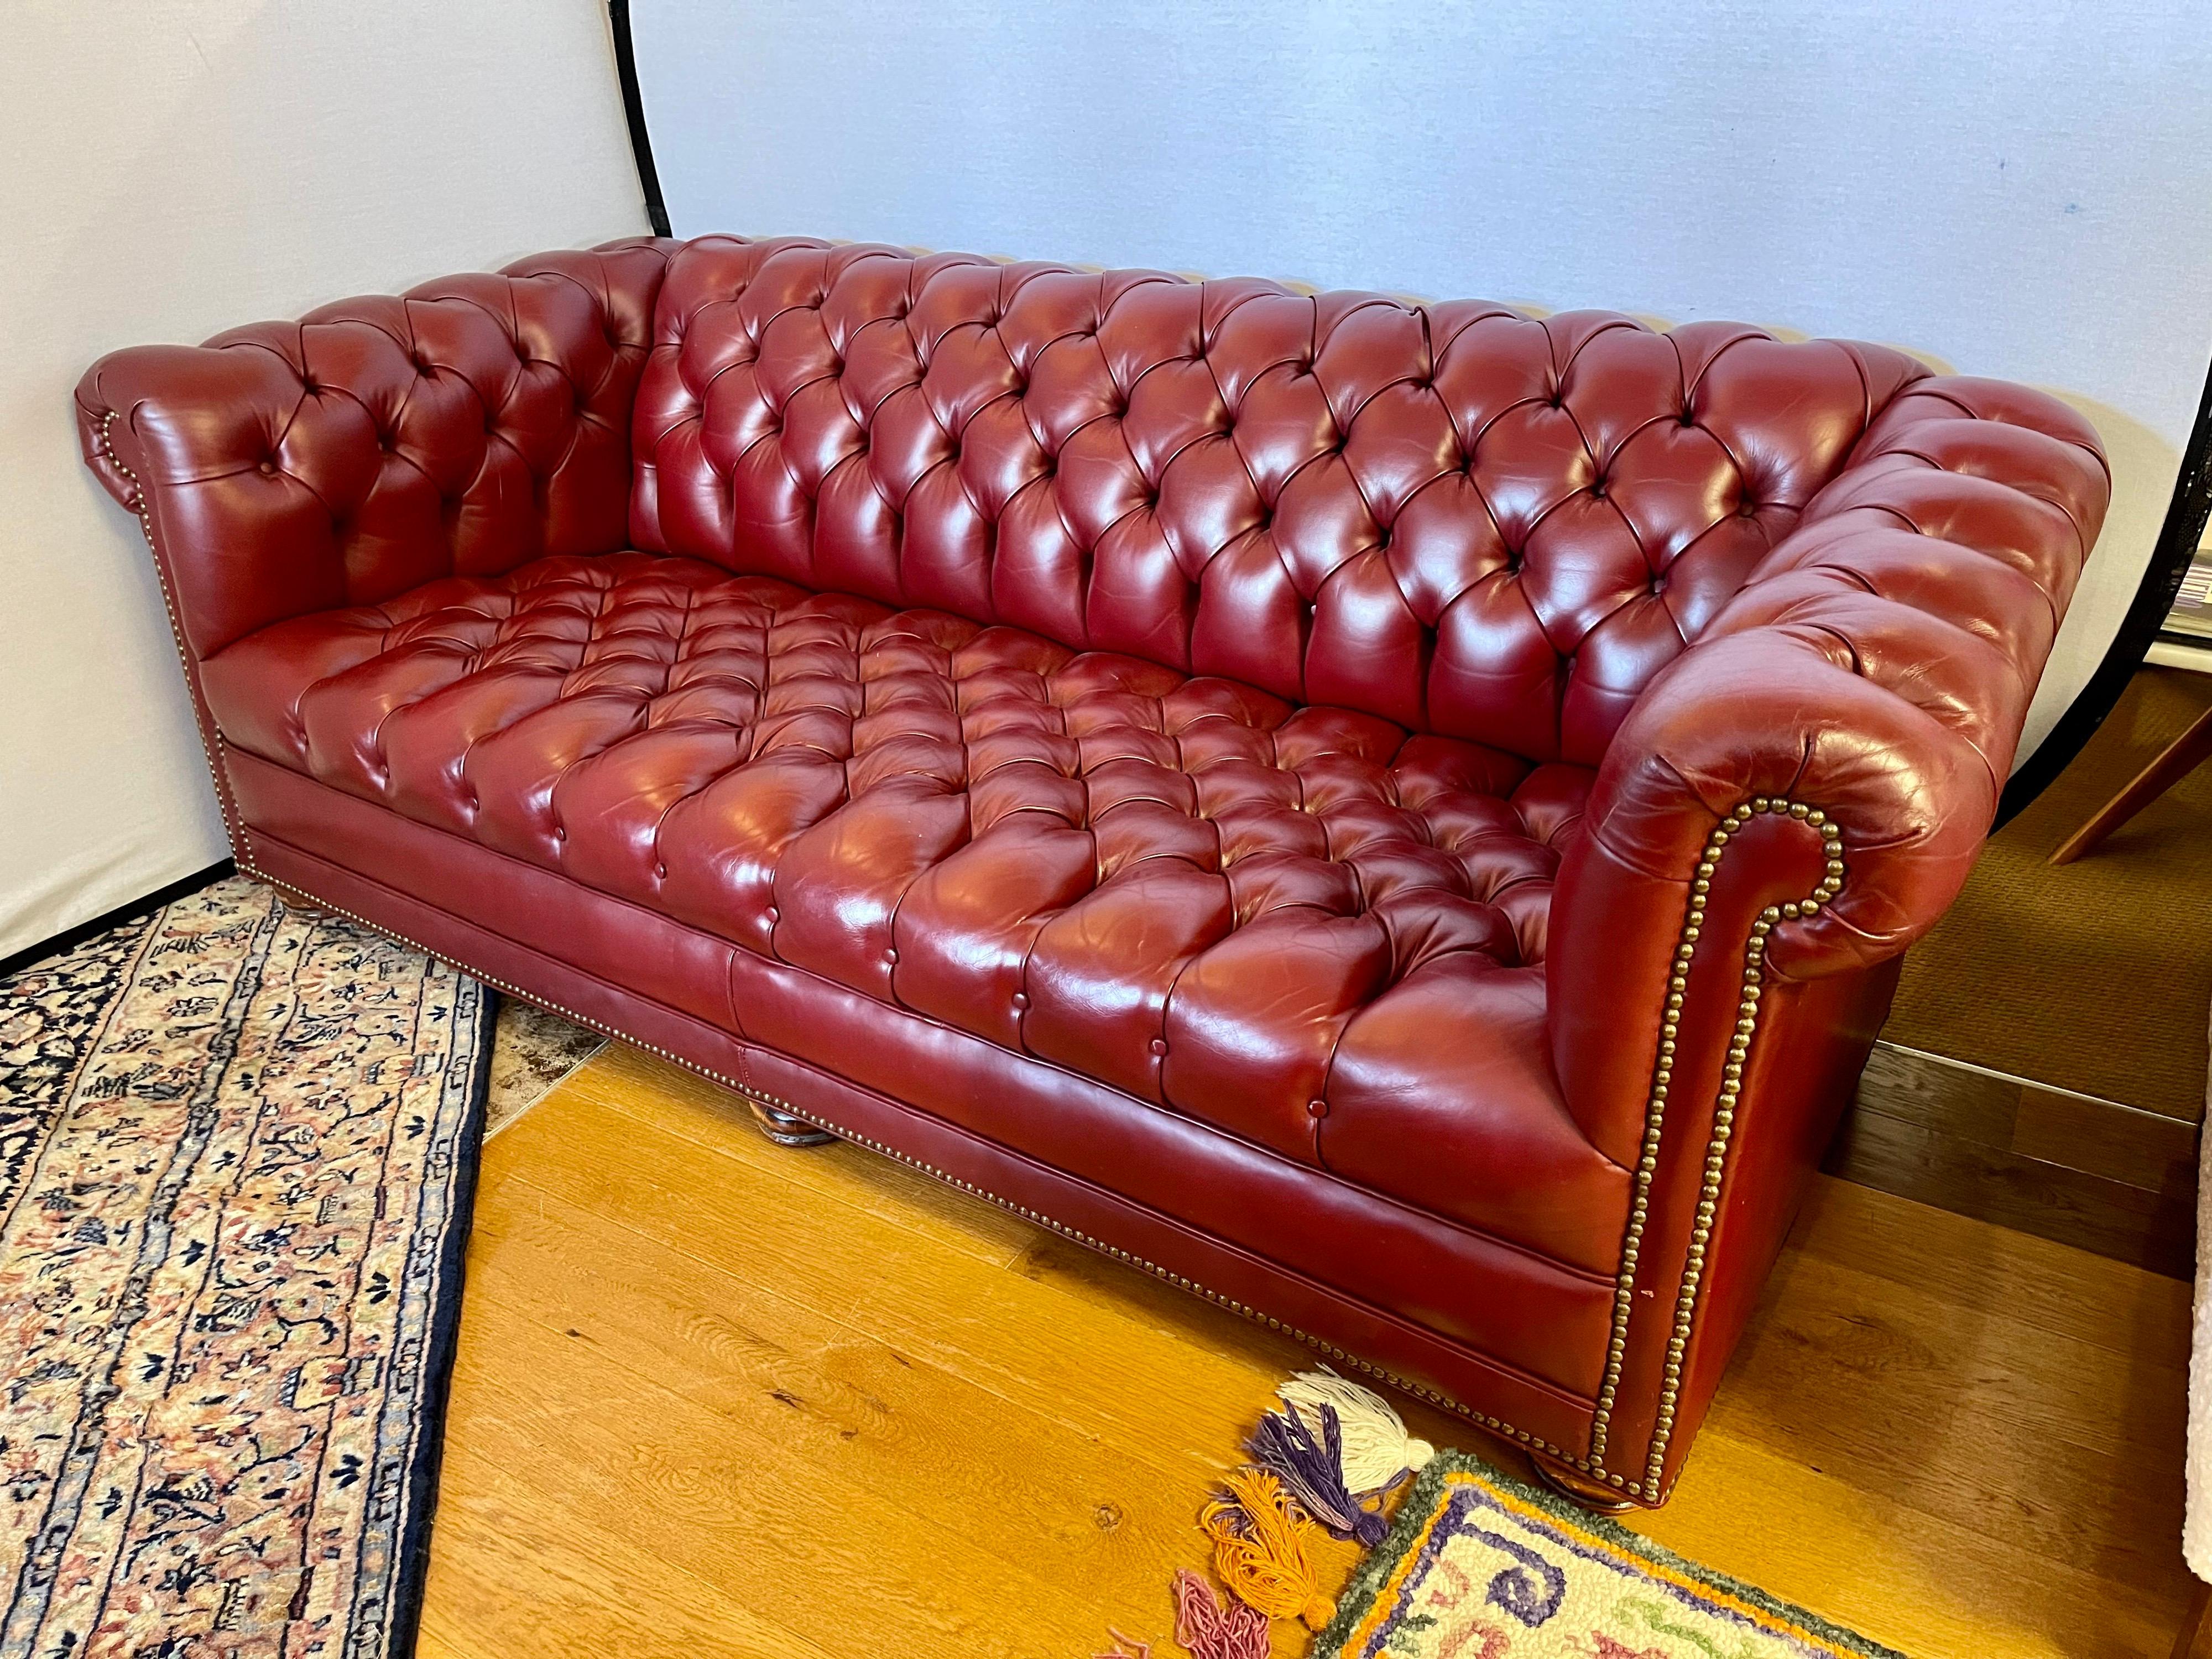 20th Century Large Oxblood Burgundy Red Leather Button Tufted Chesterfield Sofa